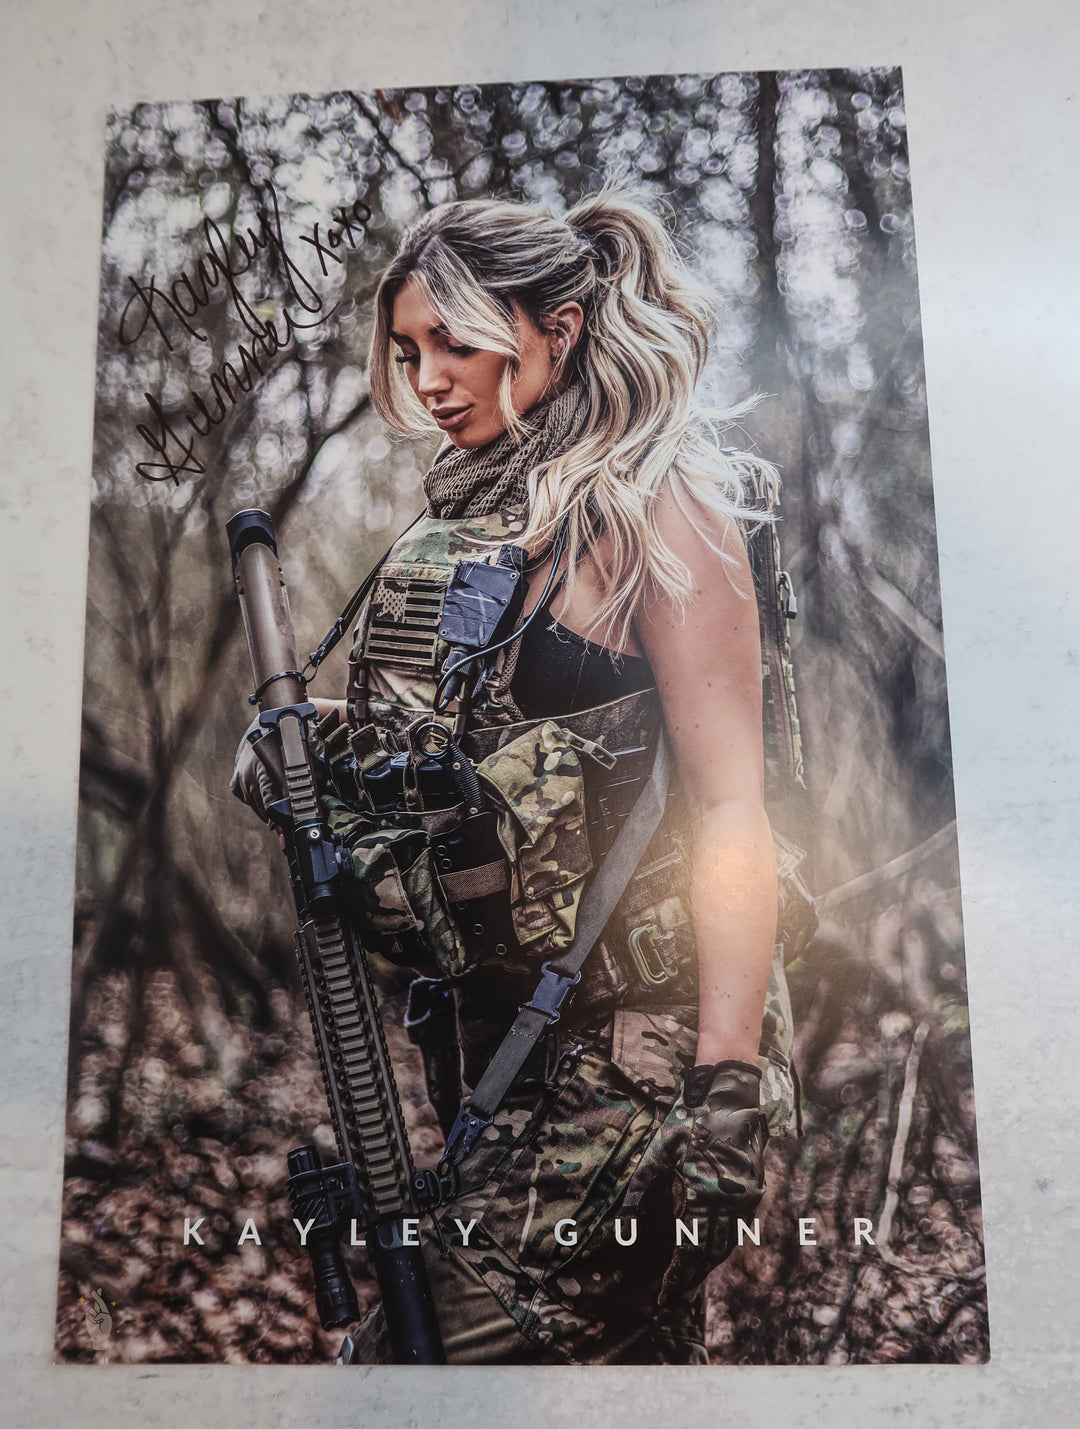 Kayley Gunner Autographed Poster 4 - Fans Utopia